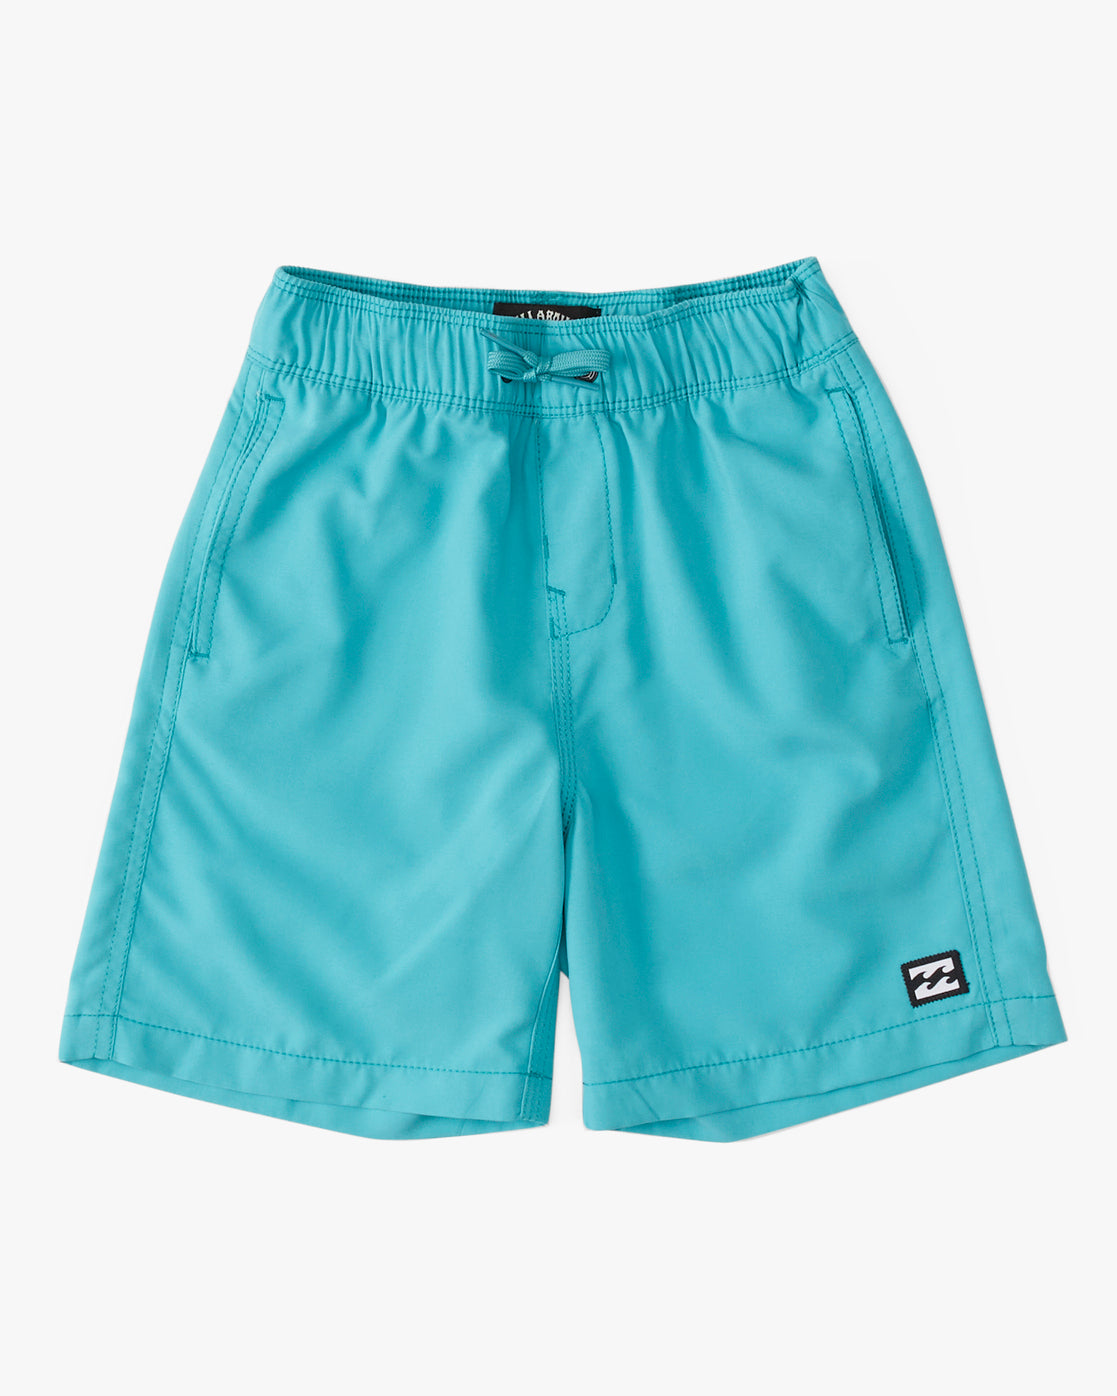 Au Départ: Smaller Than Small With Their New Nano Trunks - BAGAHOLICBOY